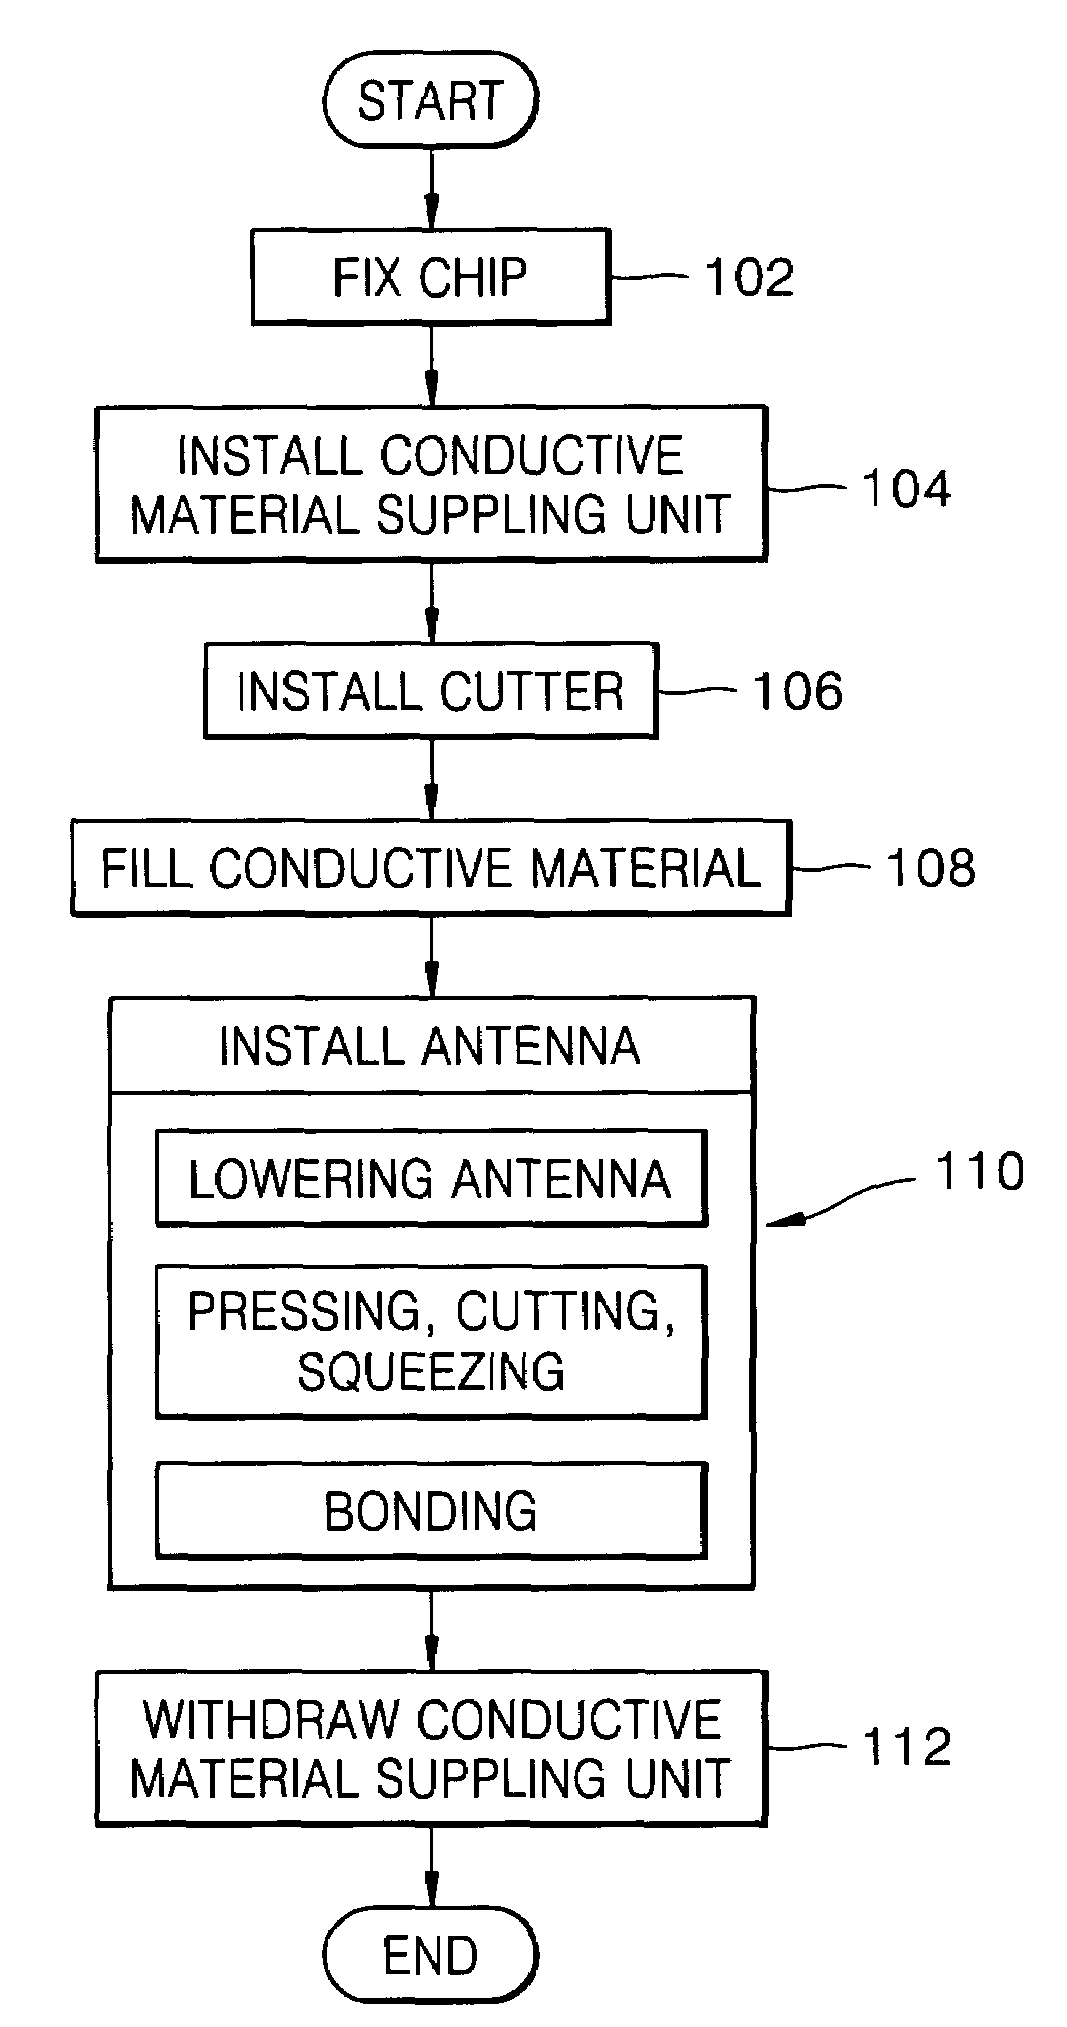 UHF RFID tag and method of manufacturing the same